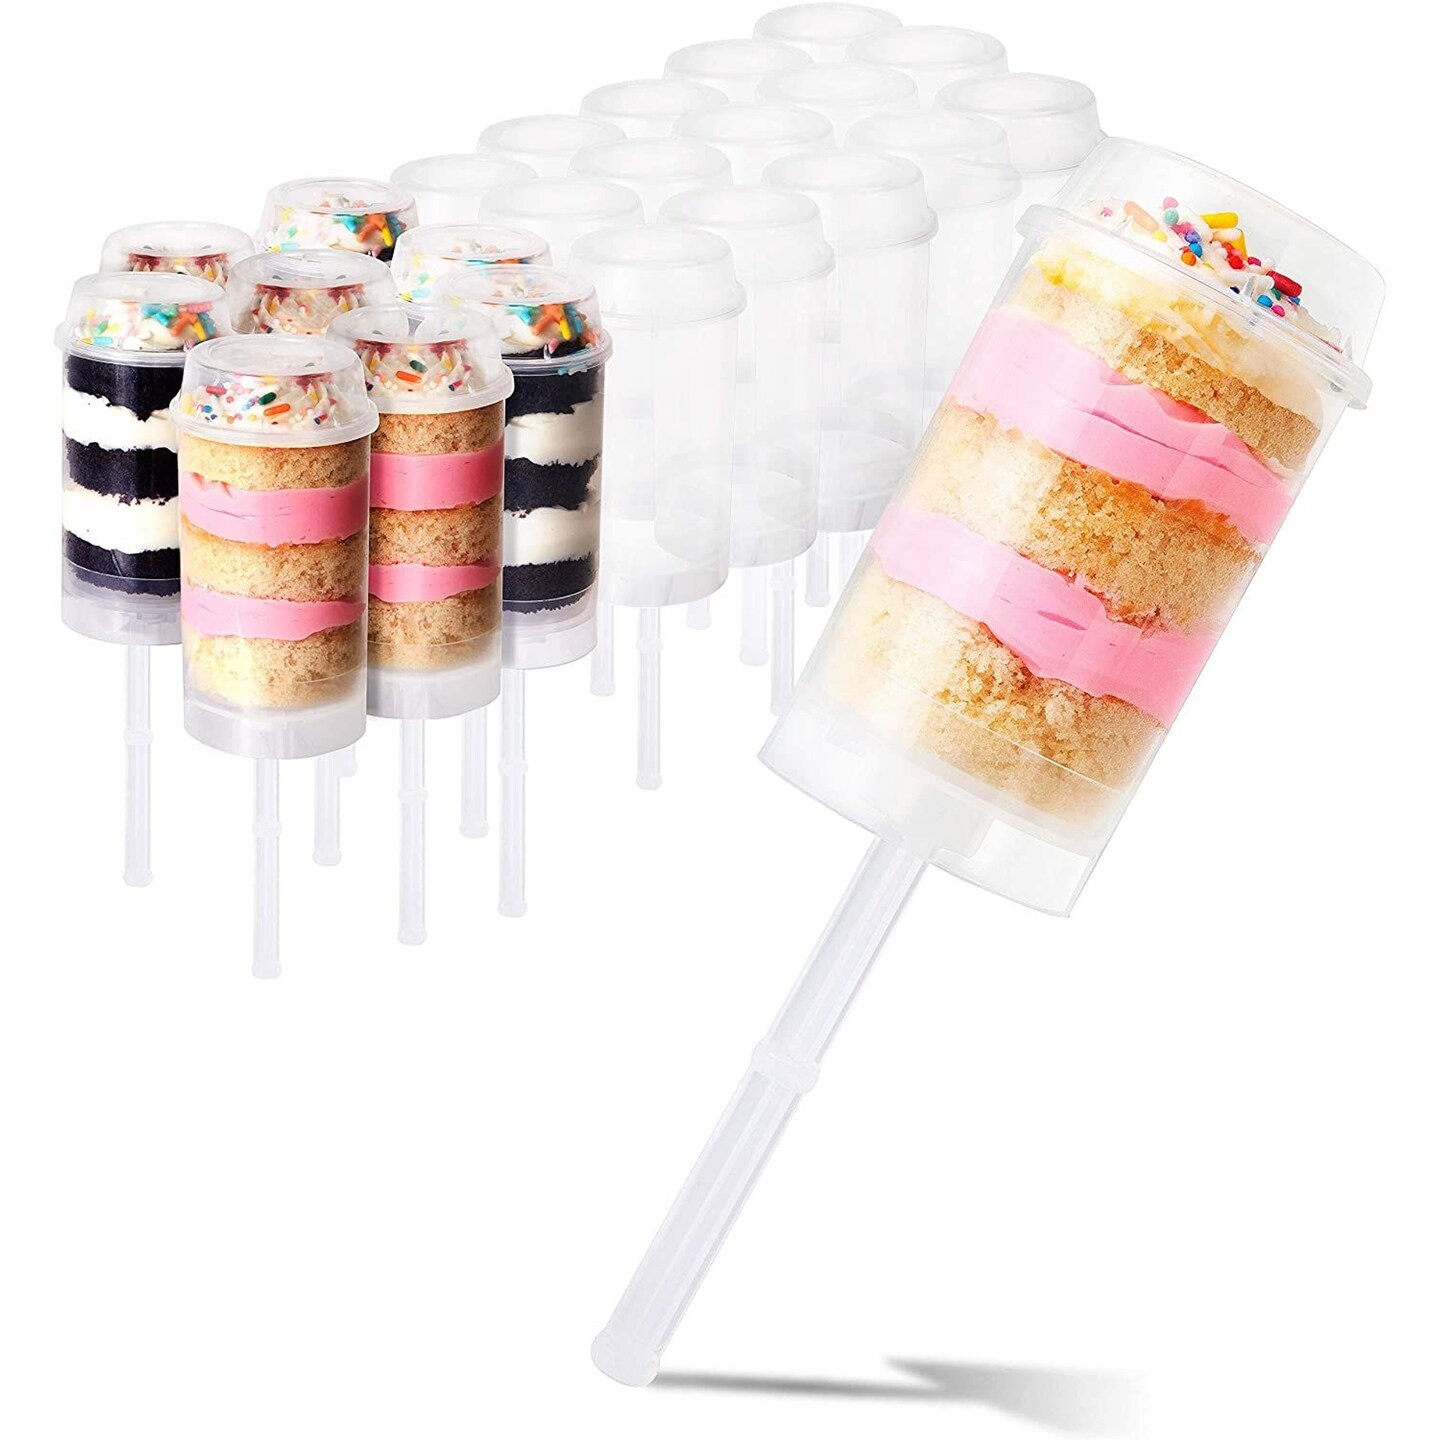 Clear Cake Push Up Pop Container, Push Pop Containers For Cupcakes, Cake  Ice Cream Mold